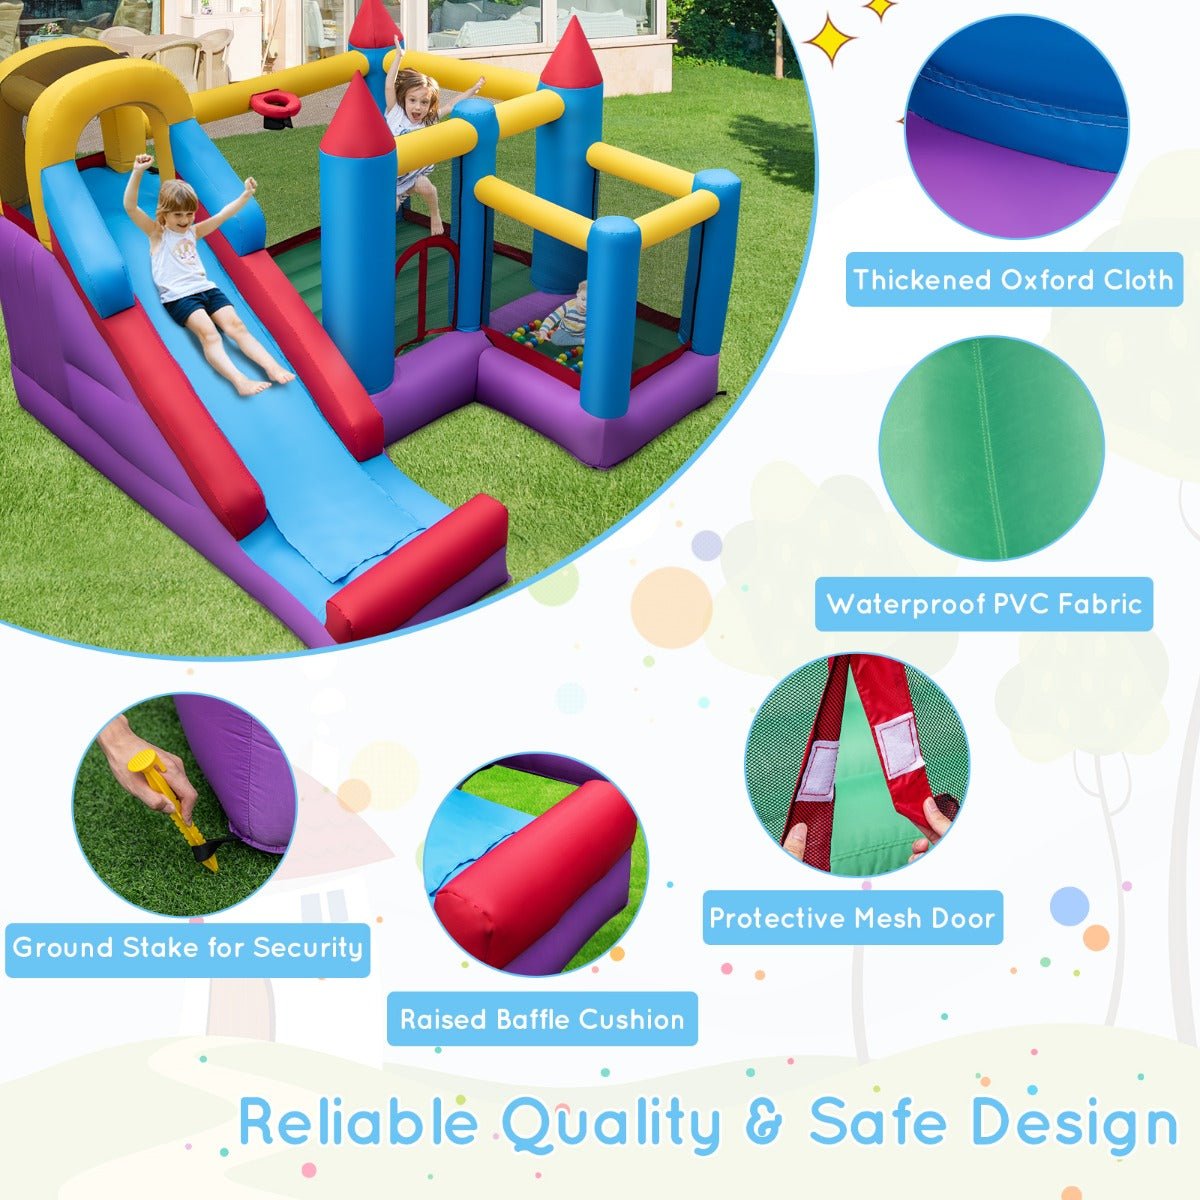 Children's Inflatable Playground - Slide, Trampoline & Adventure Zone (Blower Not Included)